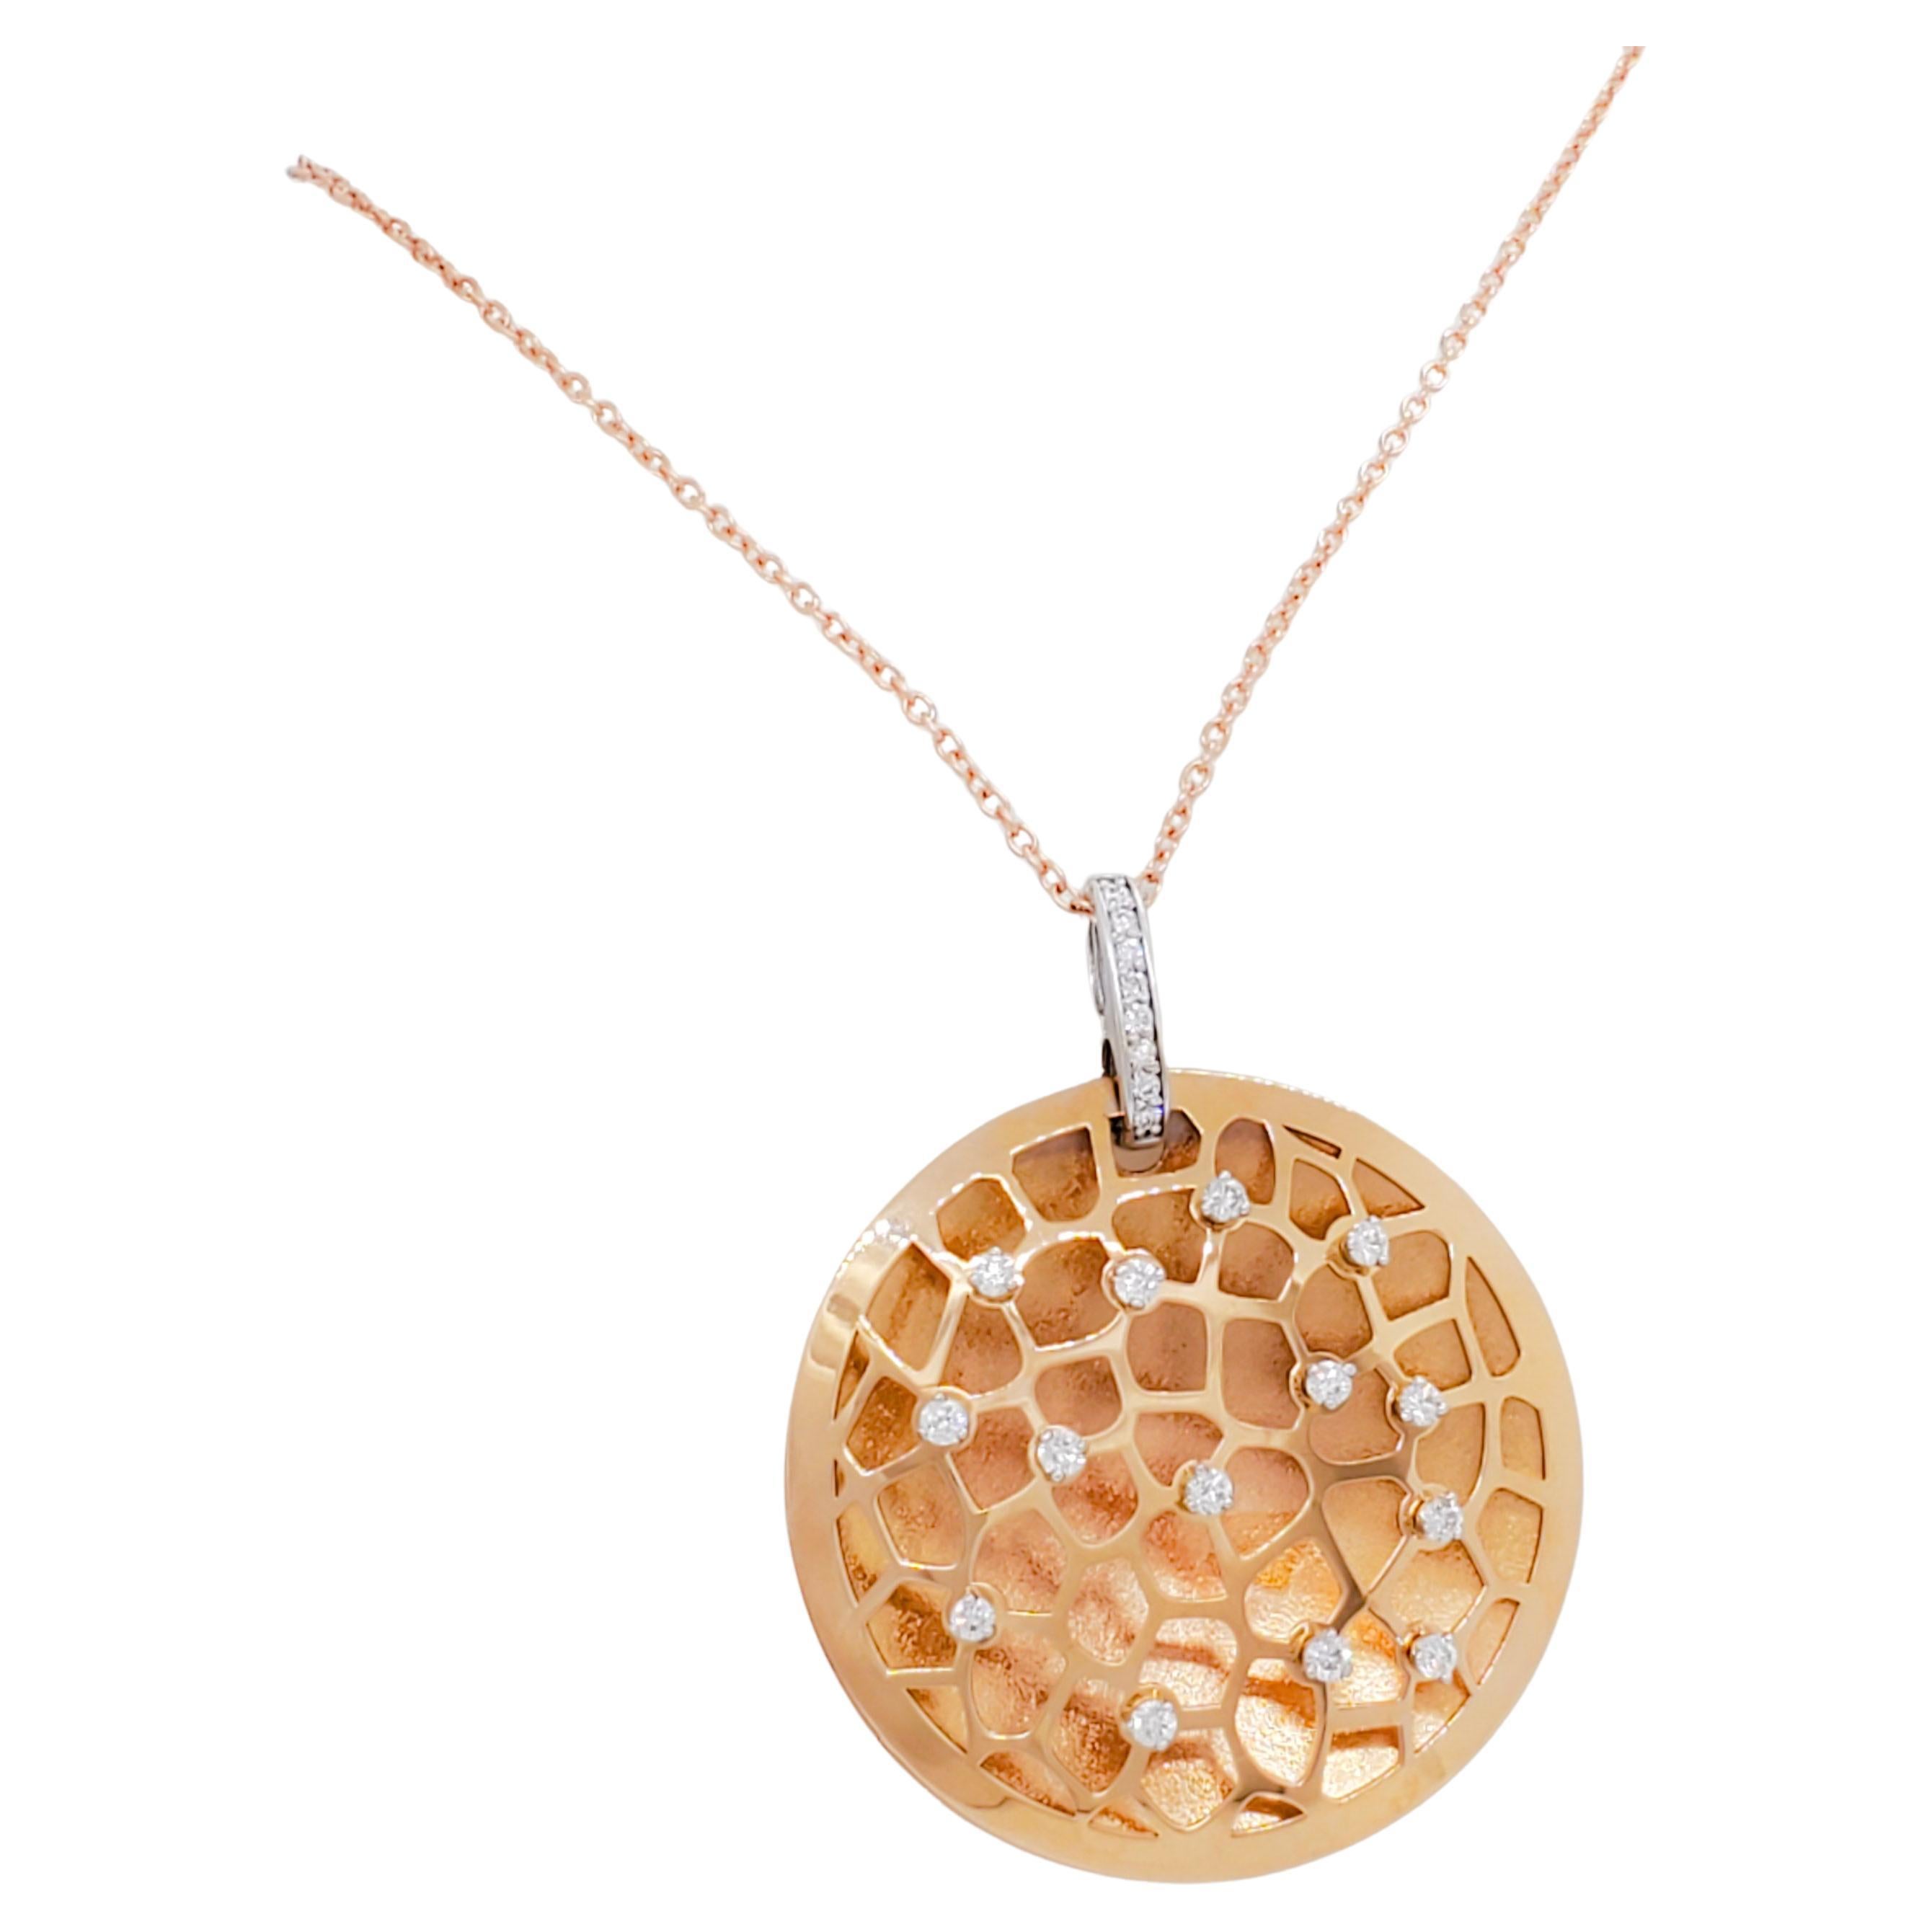 White Diamond and 18k Rose Gold Pendant Necklace